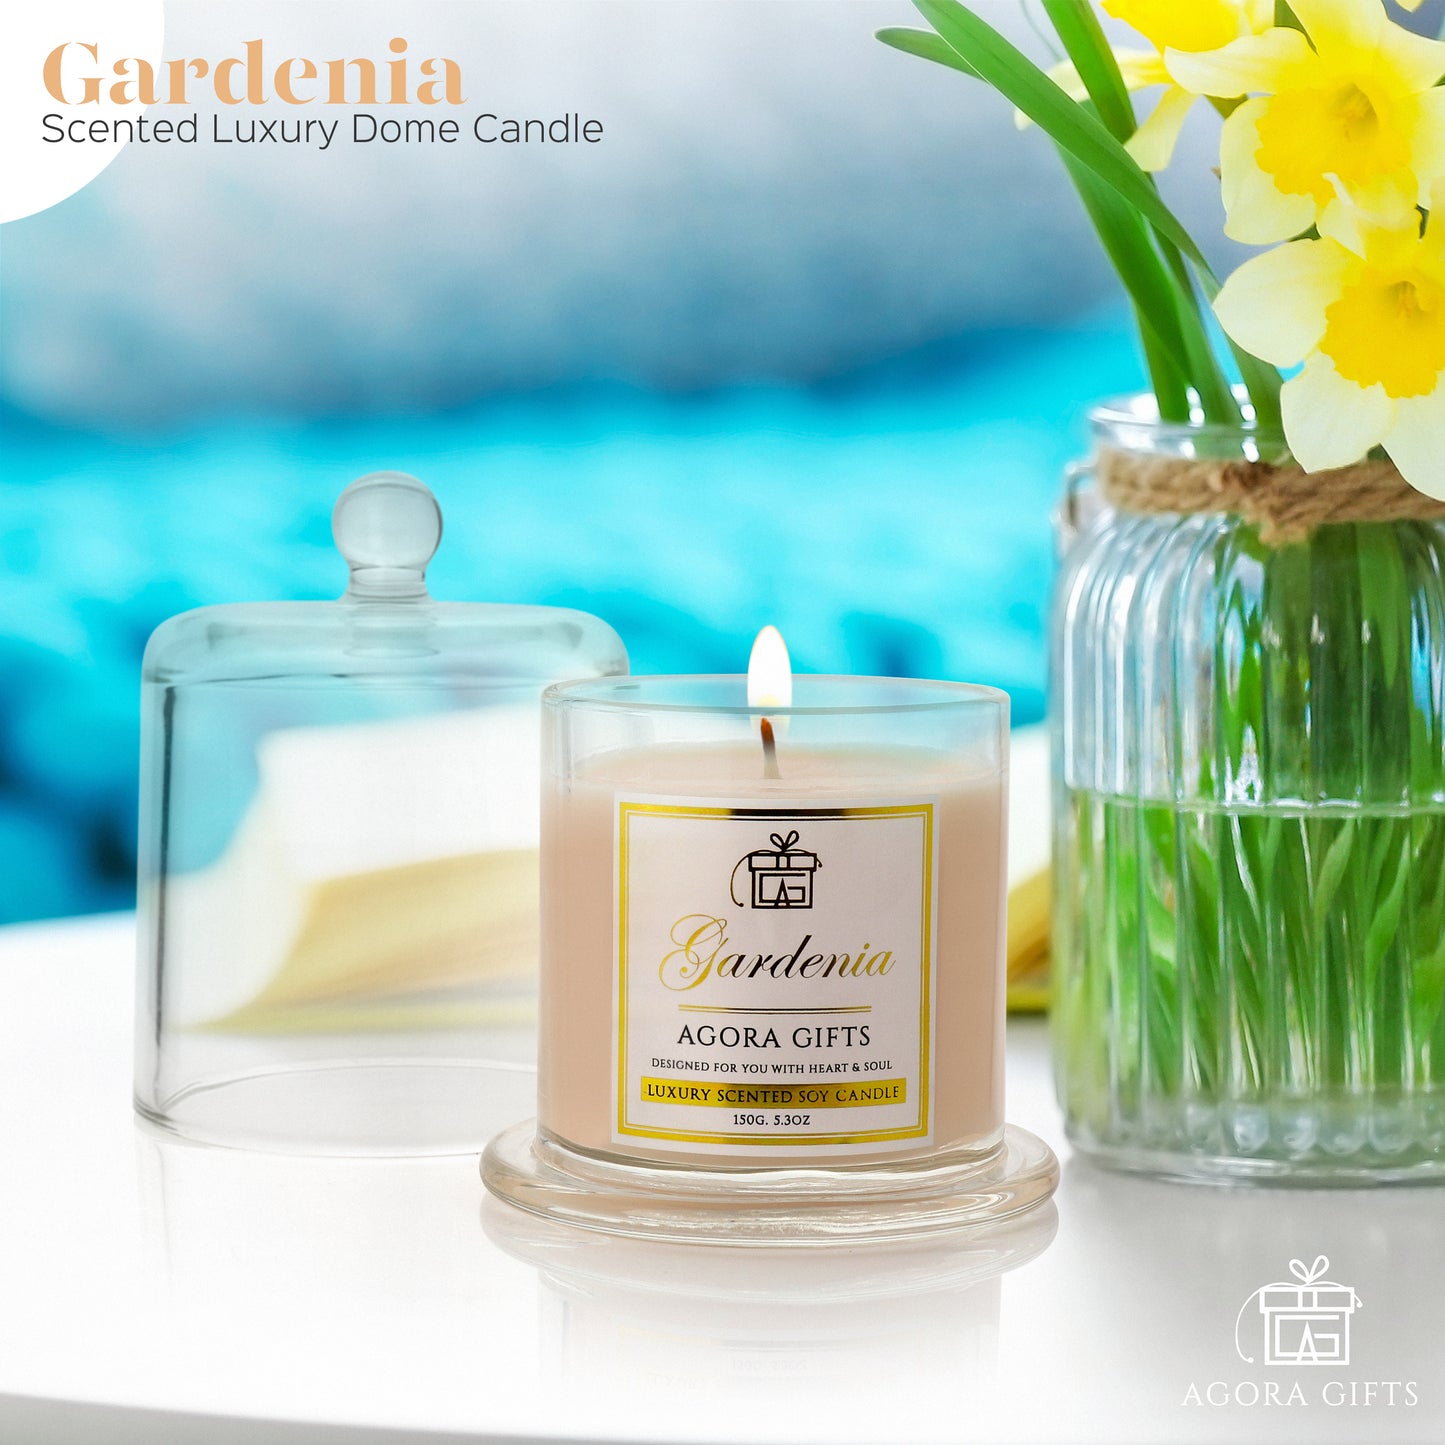 Luxury Gardenia Soy Scented Candle In A Glass Dome Decorative Cloche